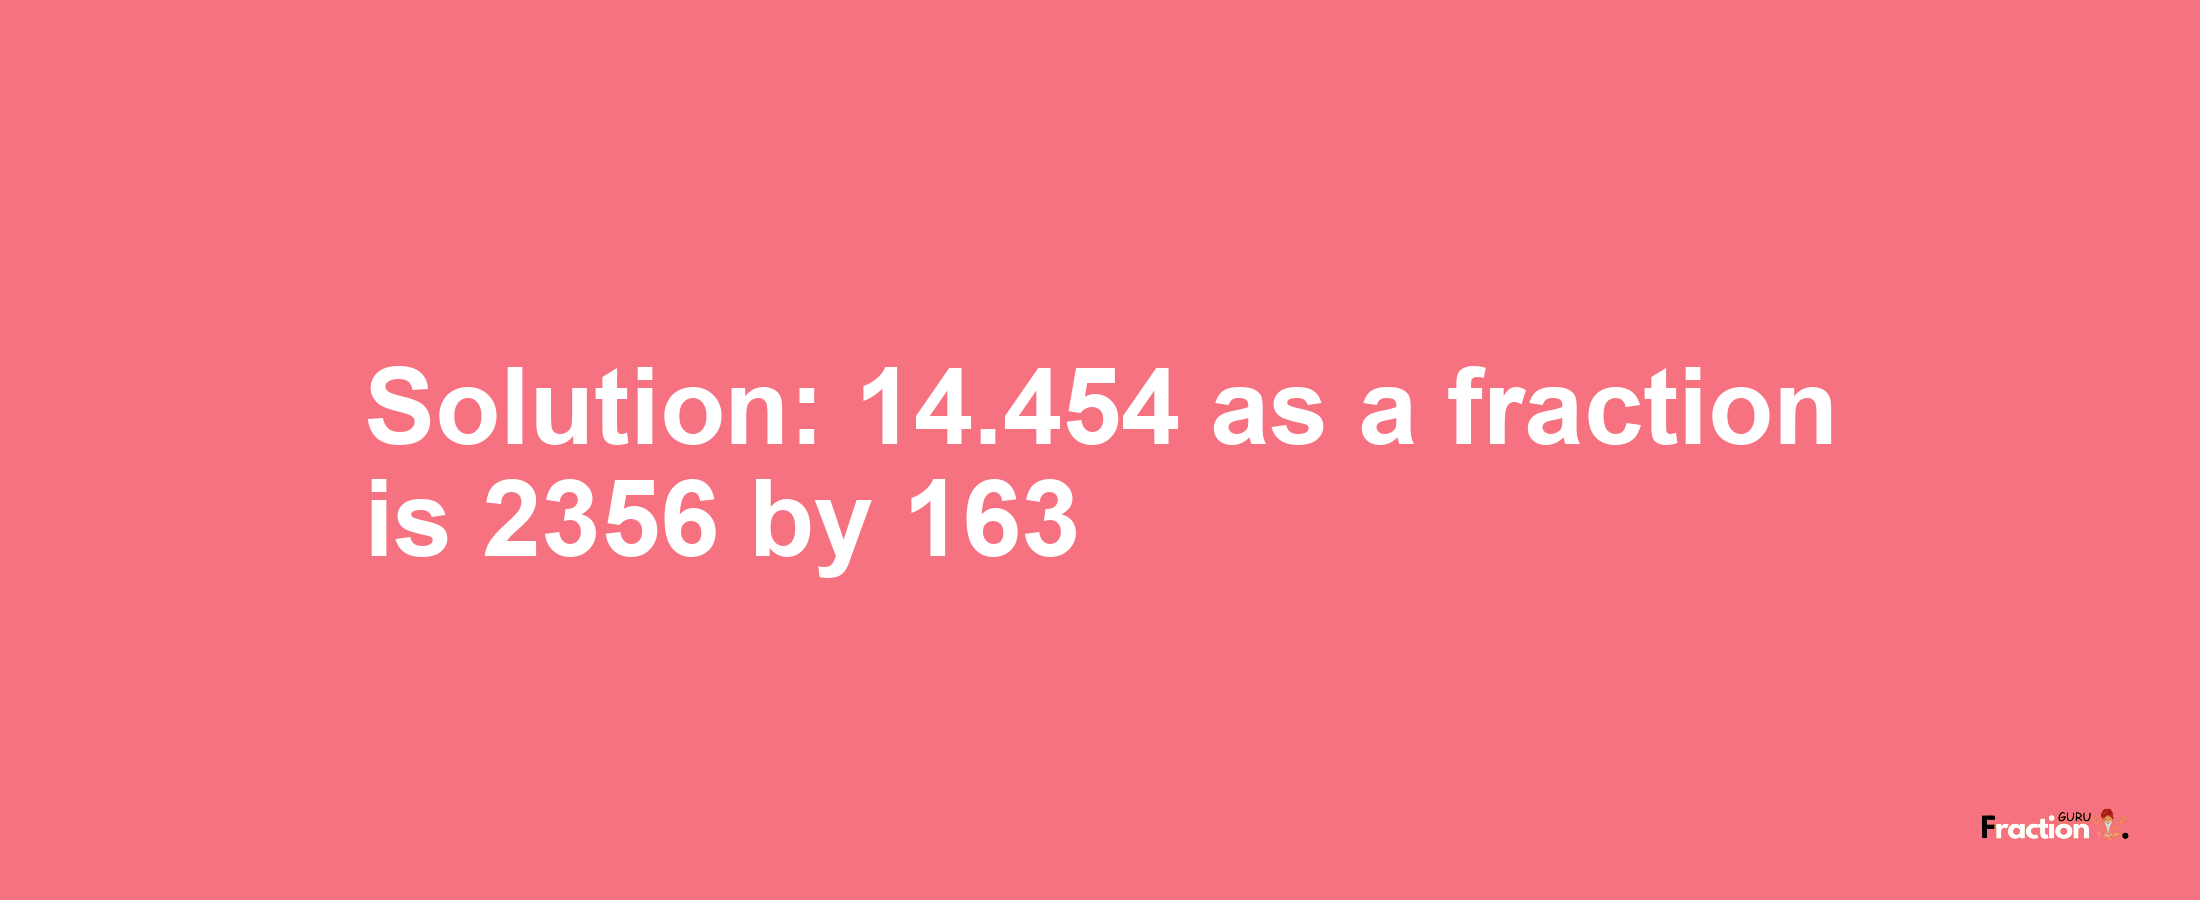 Solution:14.454 as a fraction is 2356/163